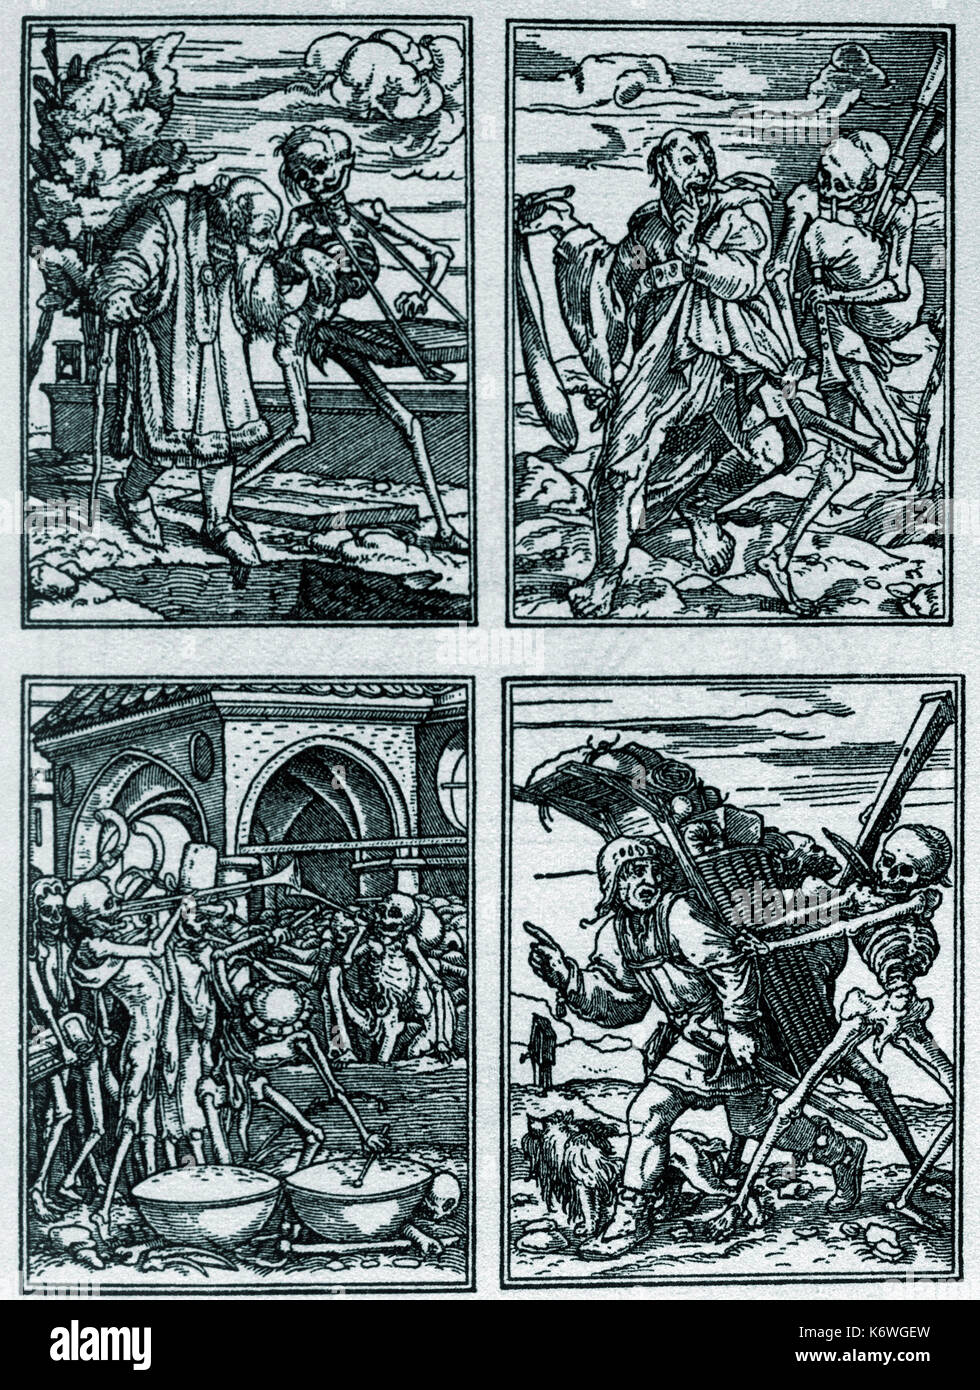 Engravings from Holbein's 'Dance of Death' showing death playing psaltery, bagpipes, trumpet, sackbut, crumhorn, nakers (drums).  C. 1538, 16th century Renaissance.  Bagpipe player.  Bagpiper.  Bagpipes. Stock Photo